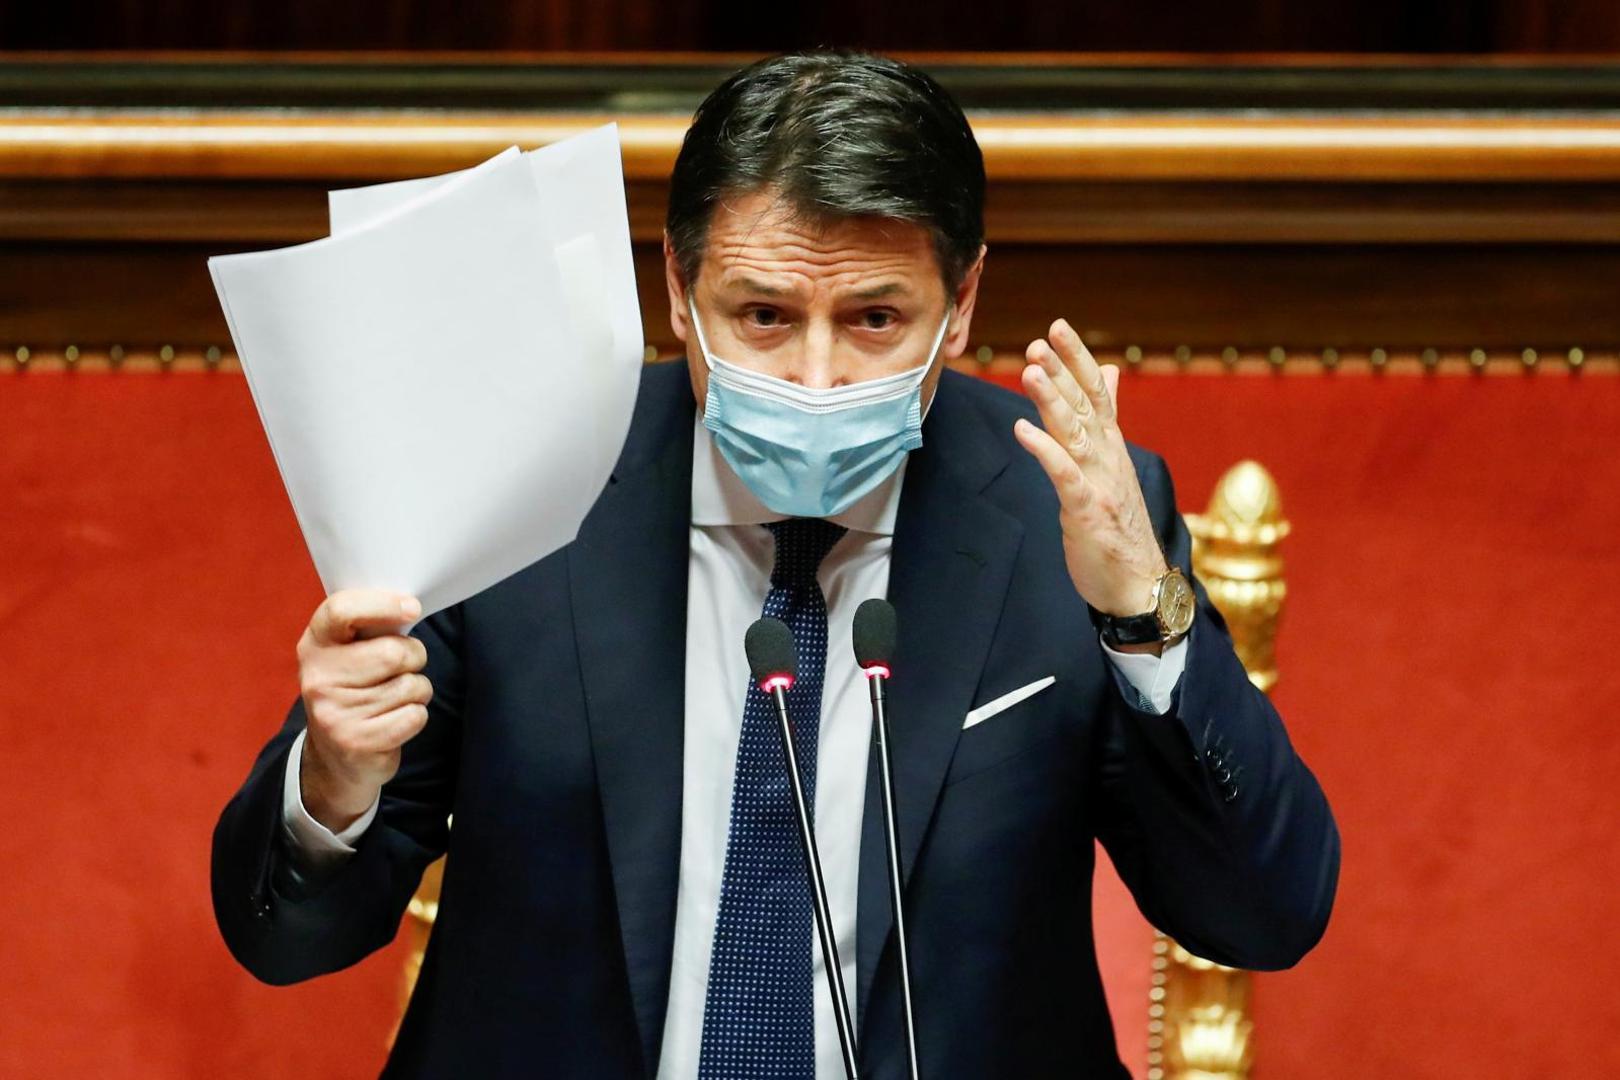 FILE PHOTO: Italian PM Conte faces a confidence vote at the upper house of parliament, in Rome FILE PHOTO: Italian Prime Minister Giuseppe Conte gestures as he speaks ahead of a confidence vote at the upper house of parliament after former Prime Minister Matteo Renzi pulled his party out of government, in Rome, Italy, January 19, 2021. REUTERS/Yara Nardi/Pool/File Photo YARA NARDI